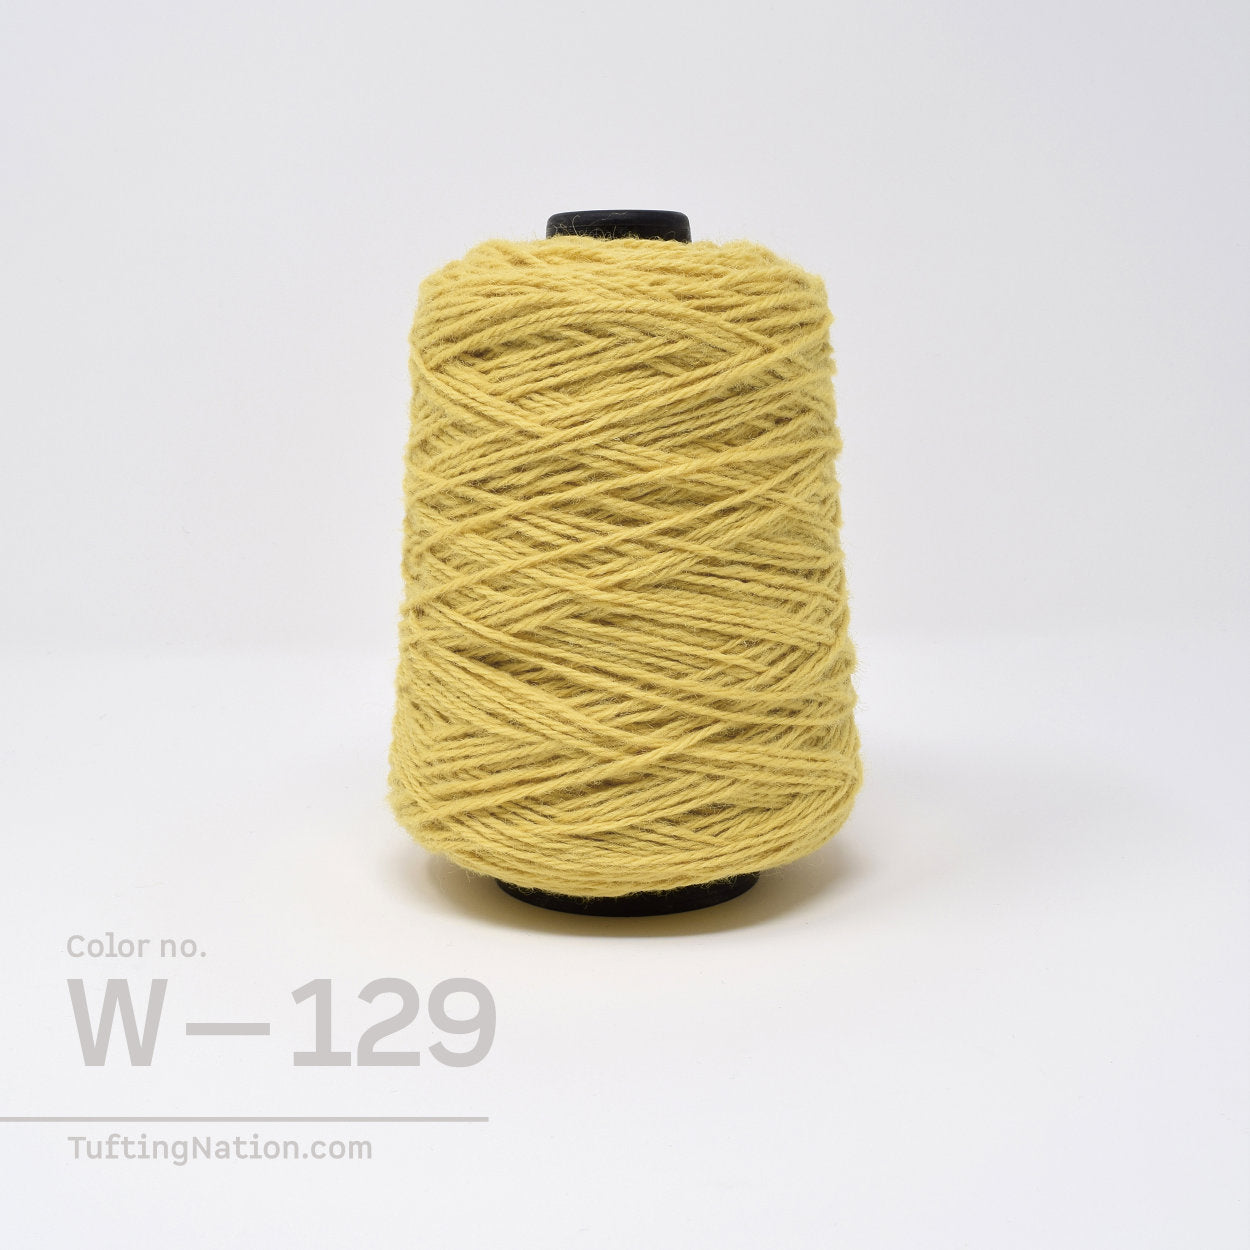 Yellow Rug Wool Yarn on cones for Rug Tufting, Weaving and Punch Needle | TuftingNation